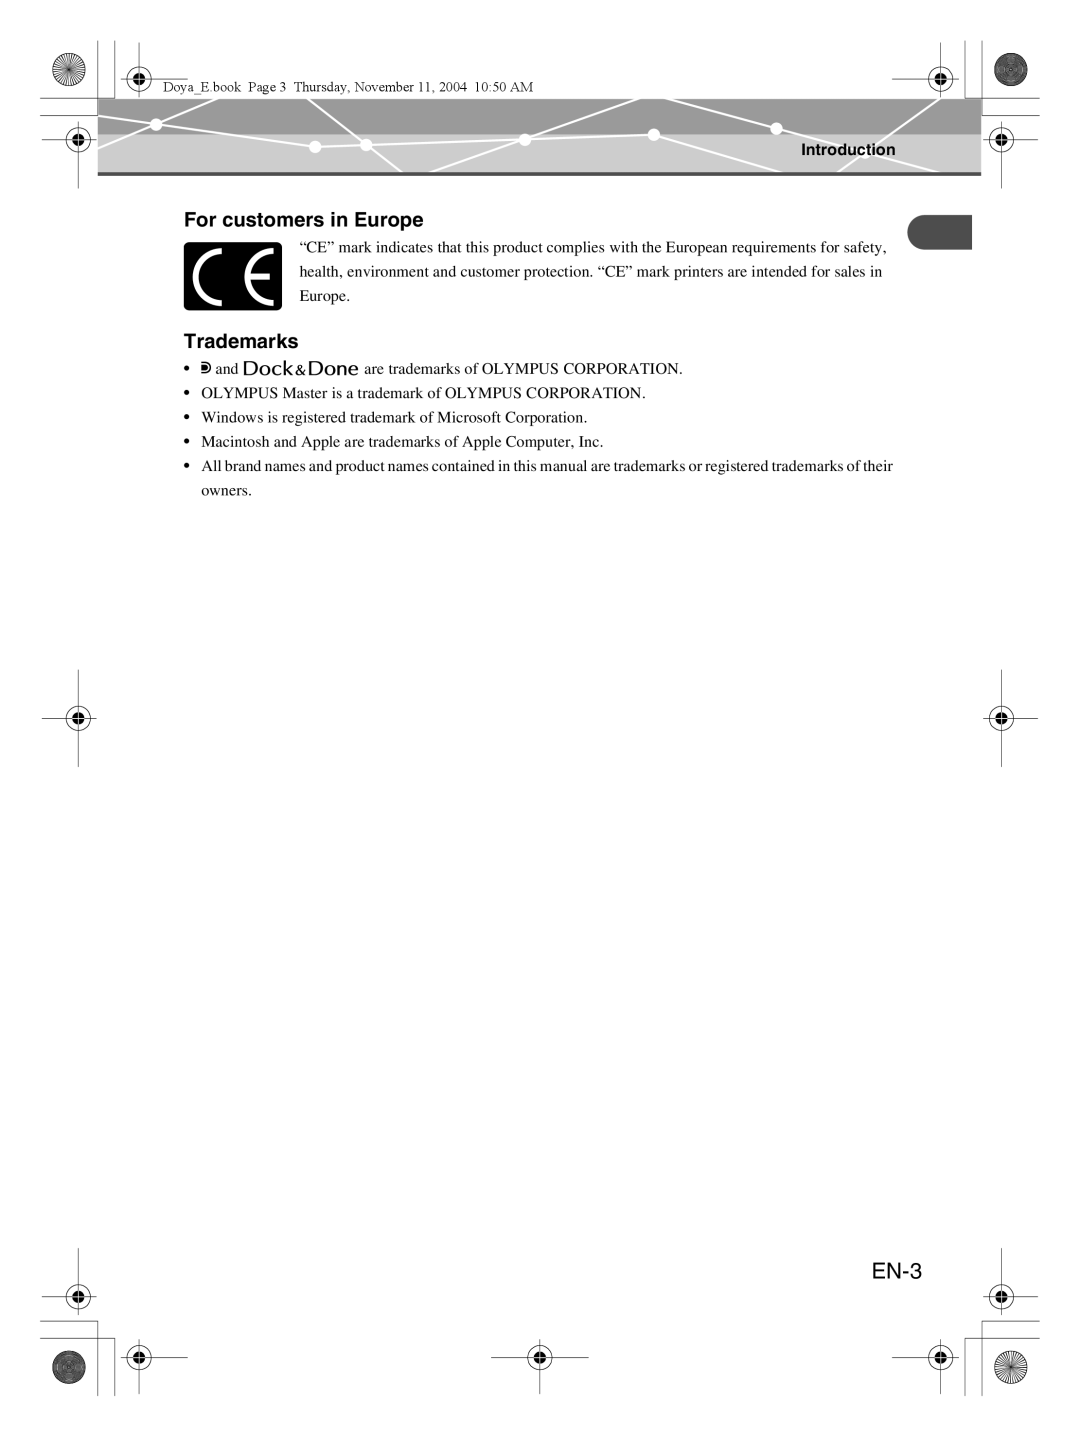 Olympus P-S100 user manual EN-3, For customers in Europe, Trademarks, Introduction 